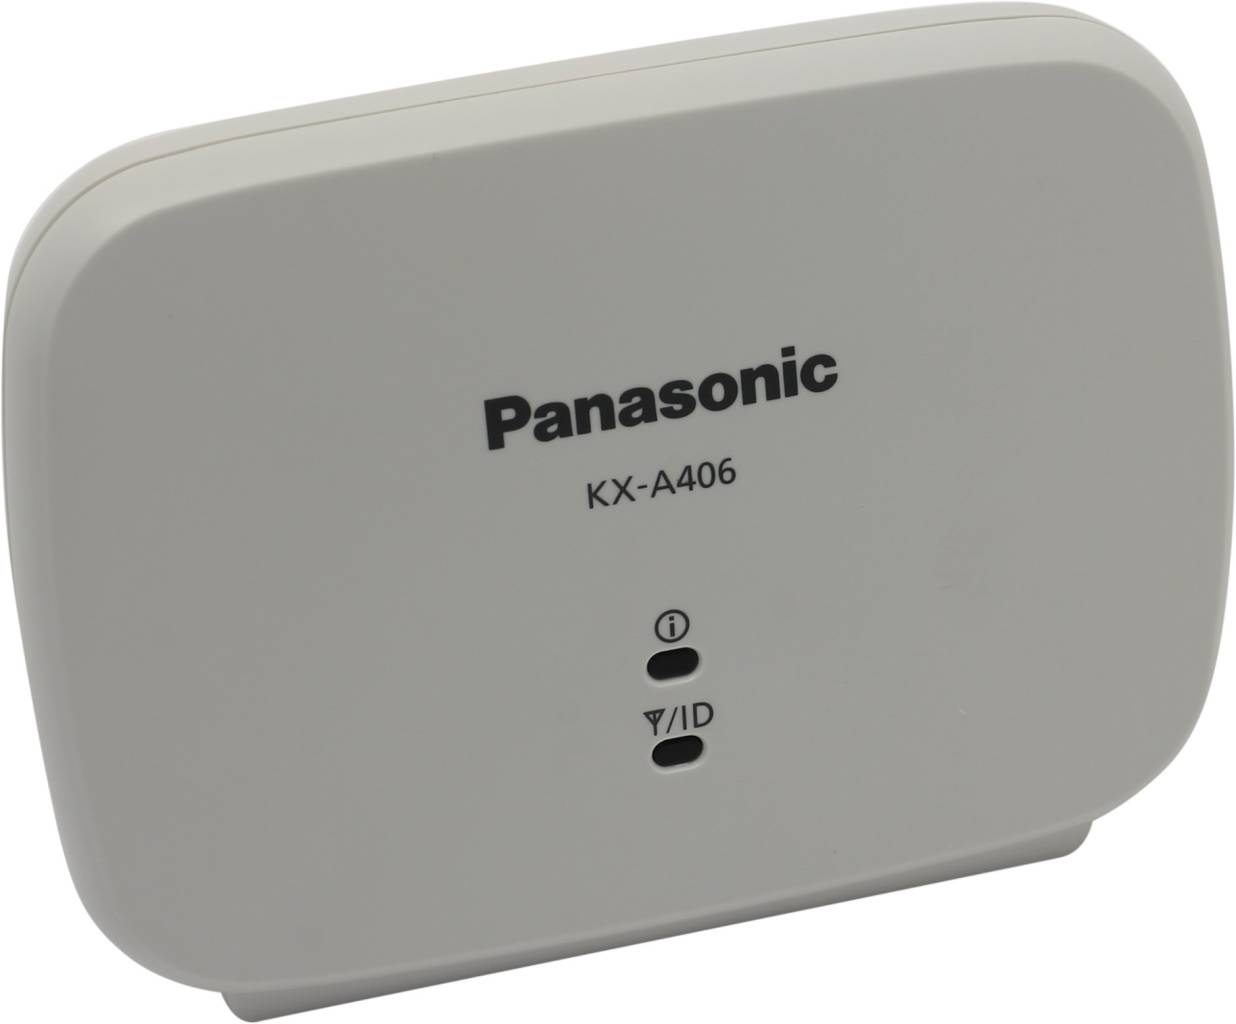  Panasonic KX-A406CE DECT Repeater